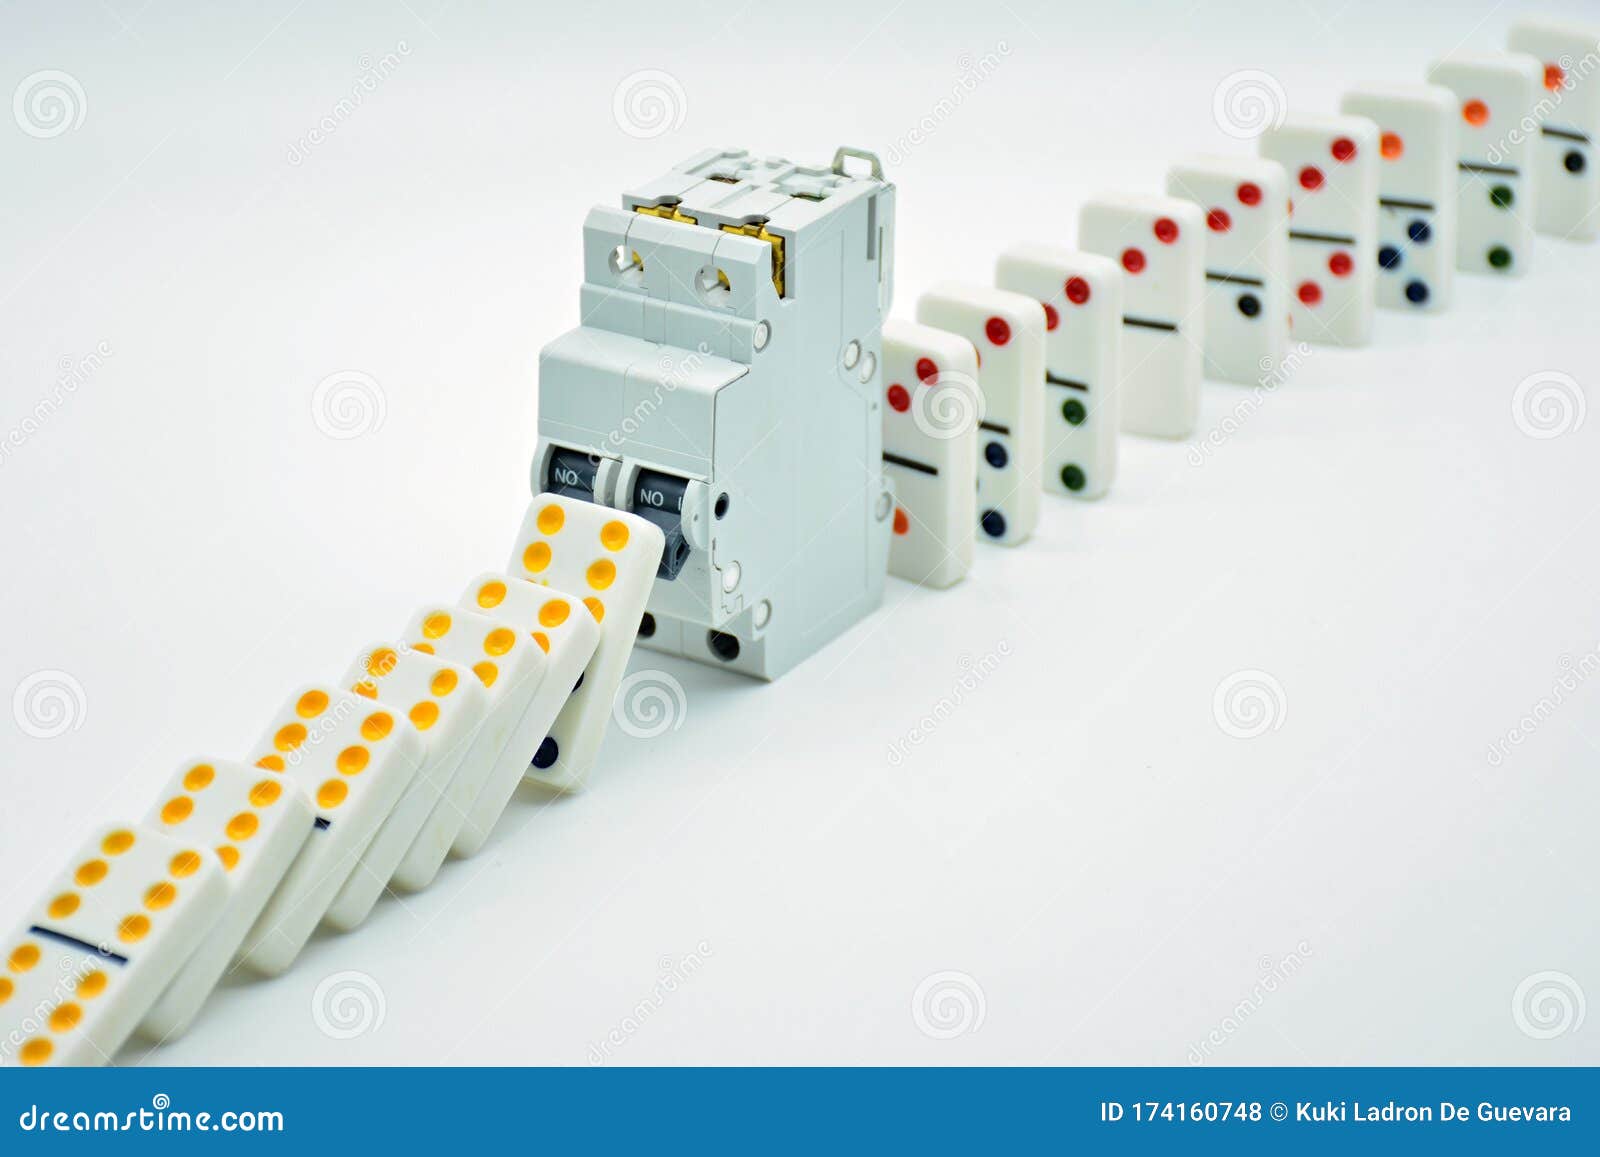 colored dominoes lined up, domino effect